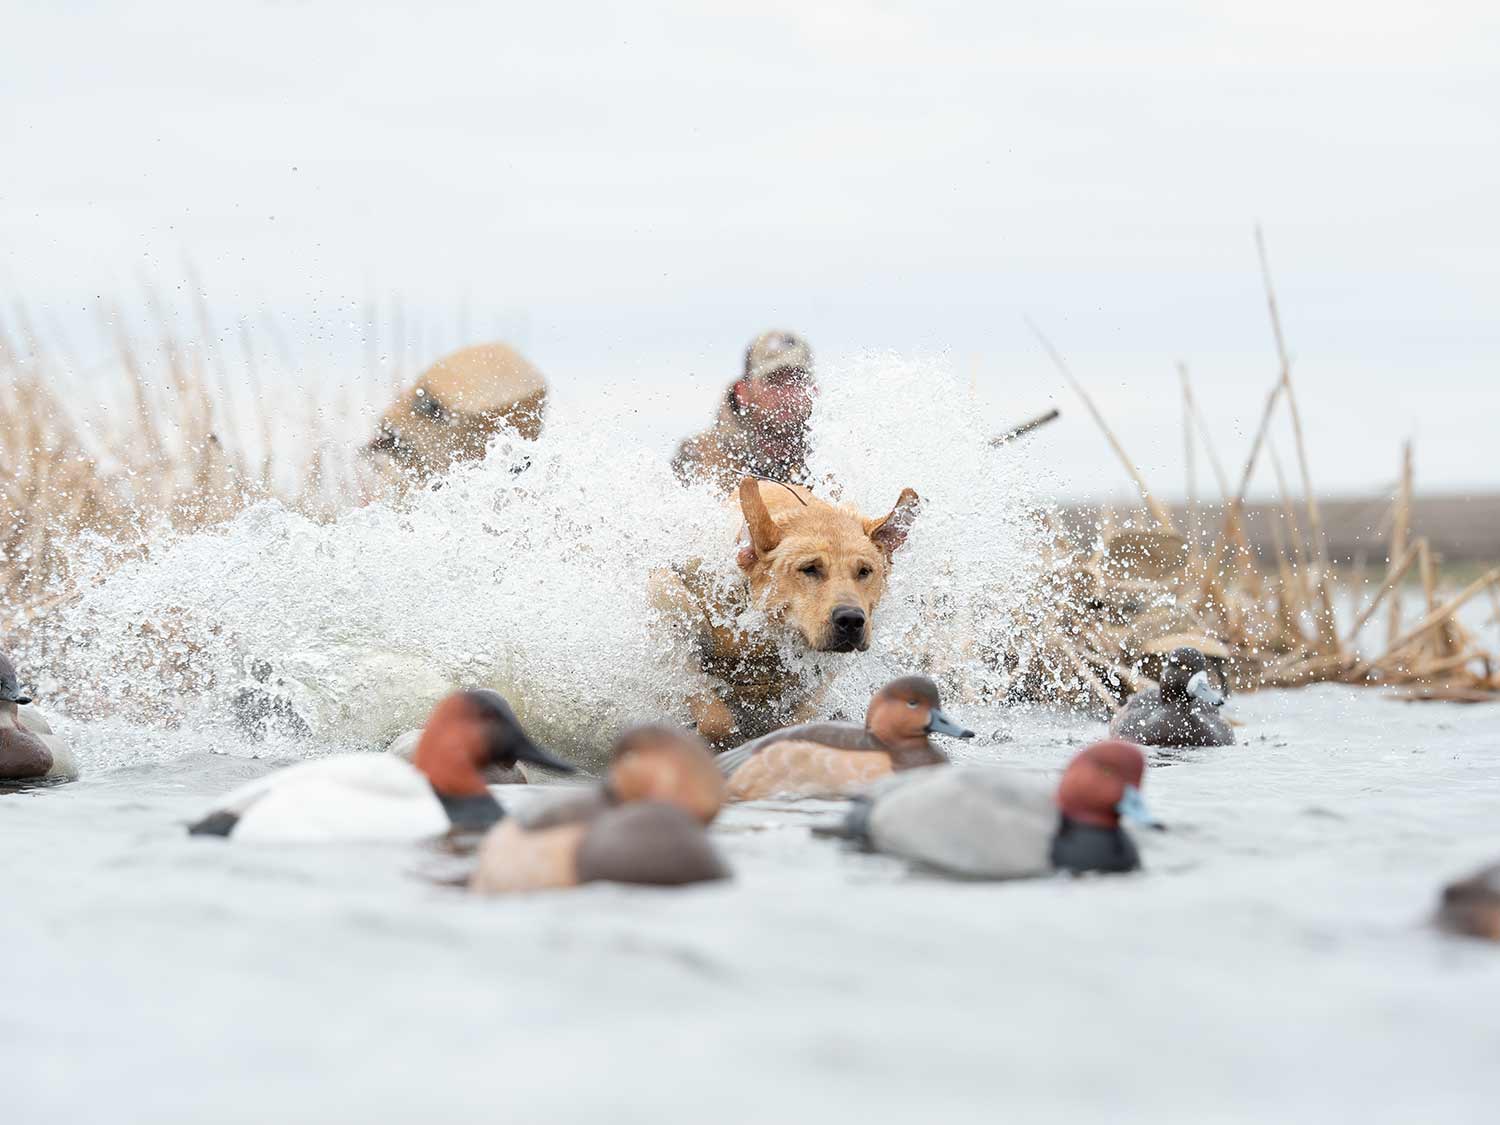 A waterfowl hunting dog retrieving a duck.